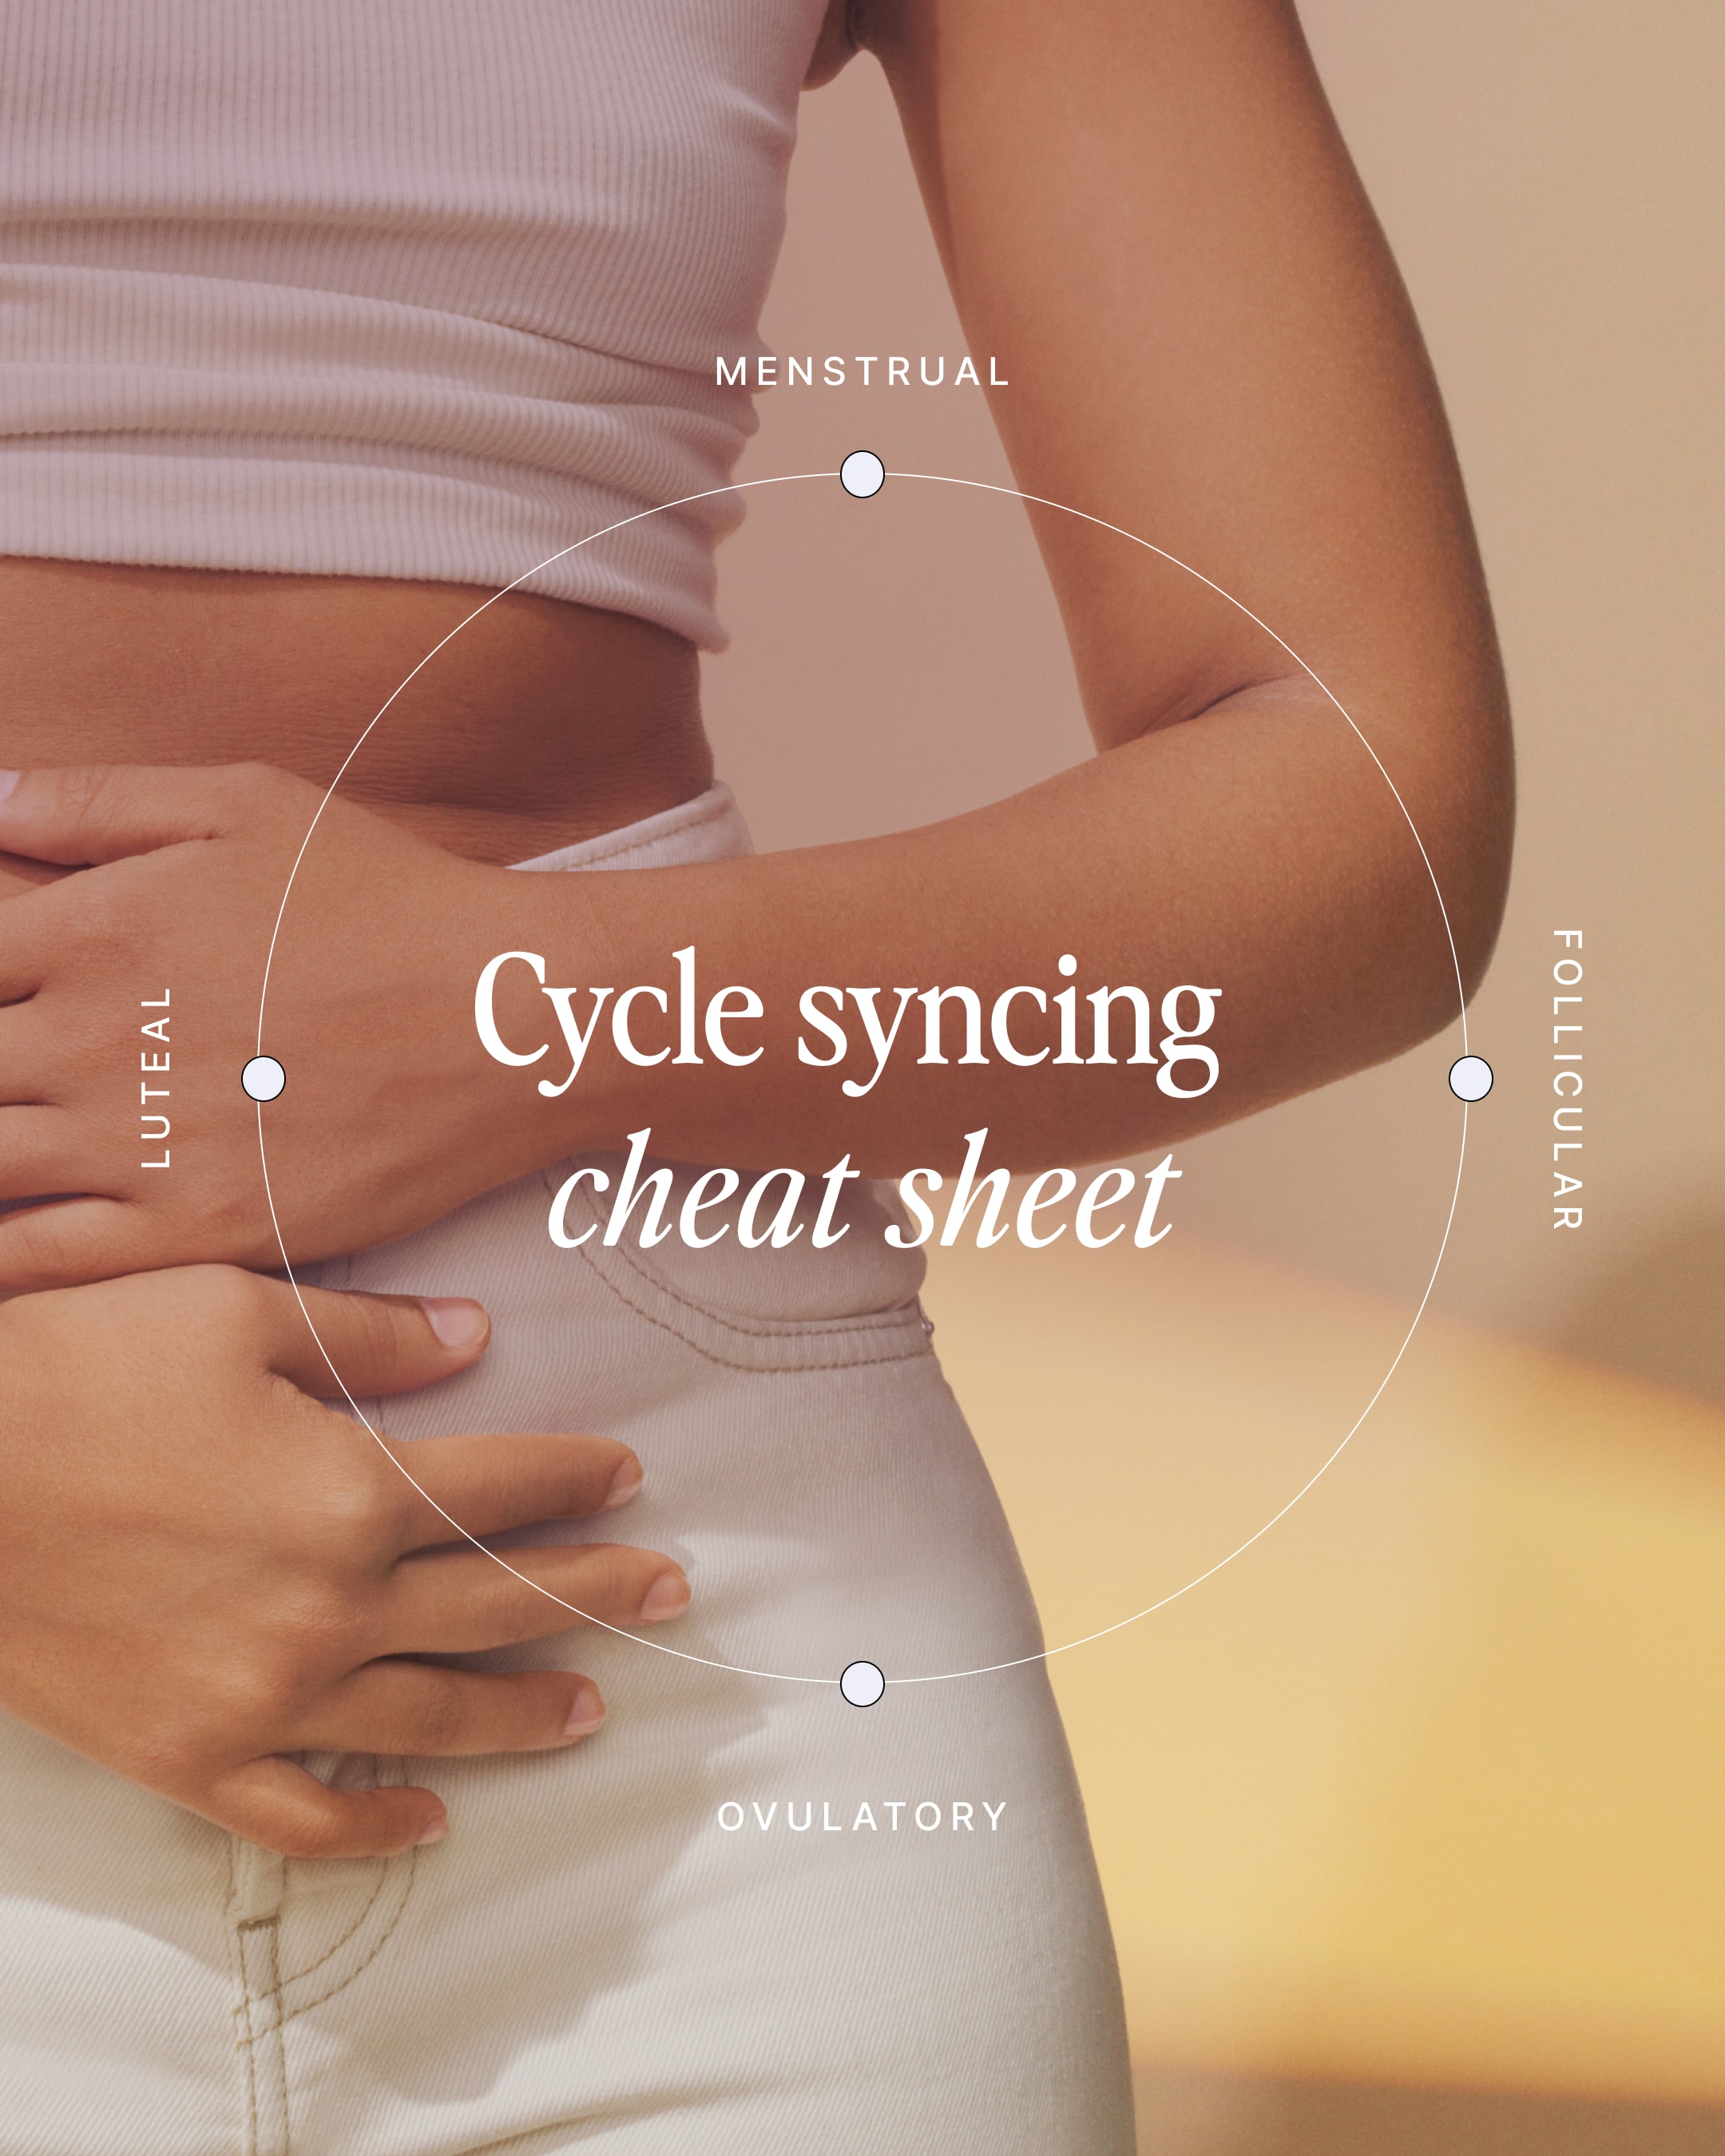 How Does Cycle Syncing Work?